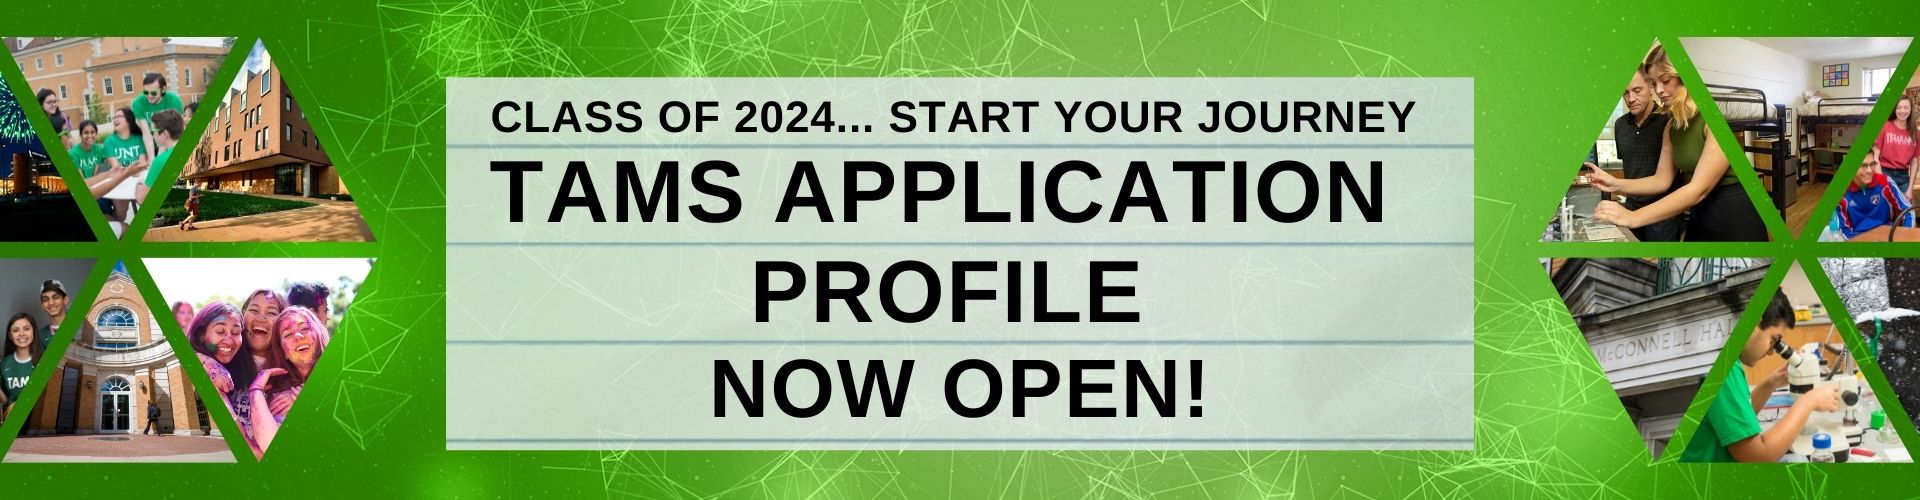 TAMS Class of 2024 Application opens July 19, 2021